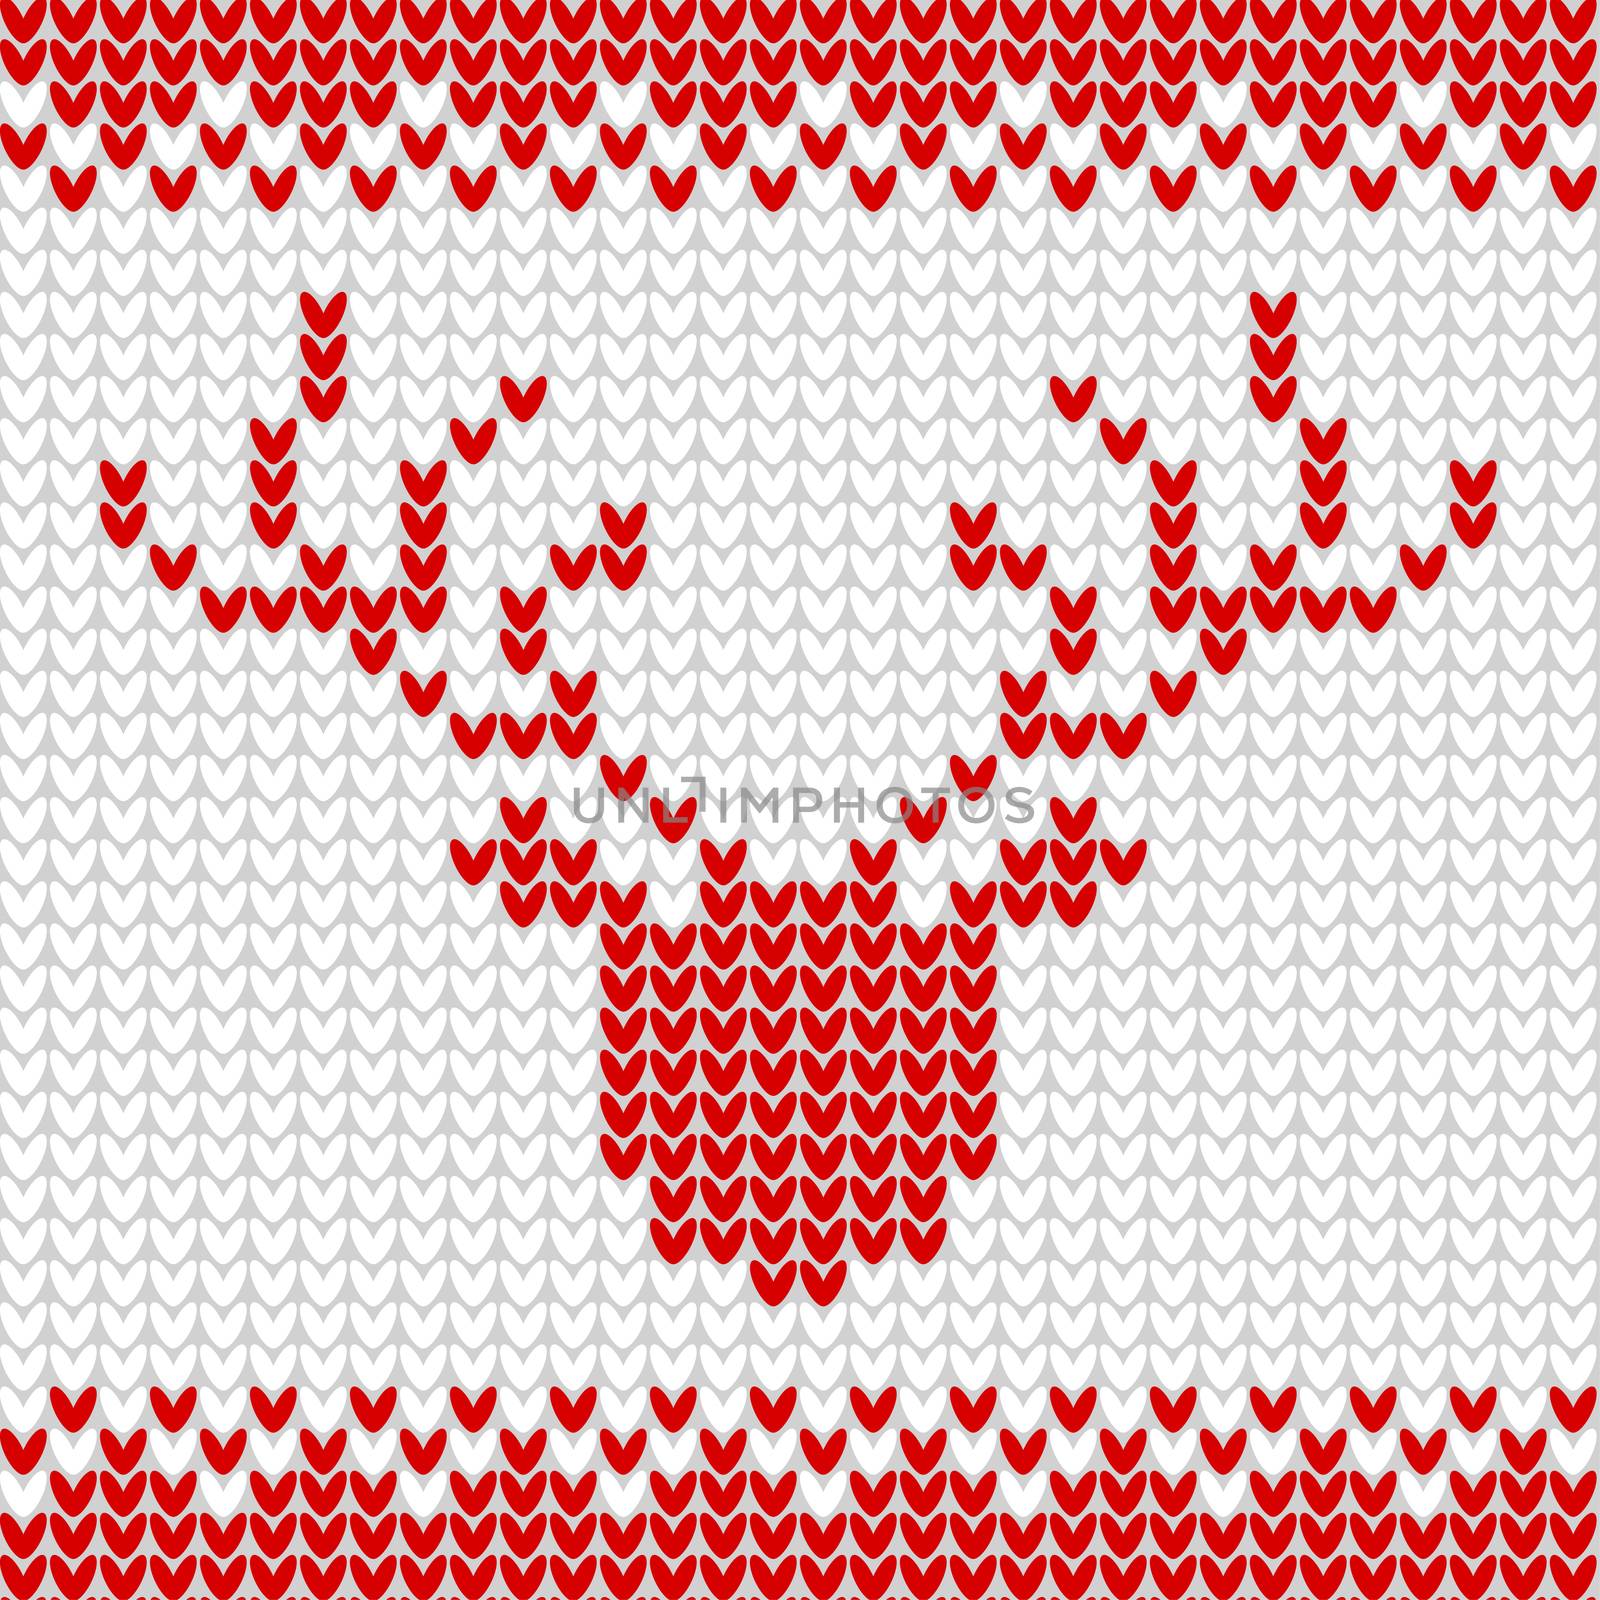 Knitted realistic seamless pattern of white and red colors with a deer. Knit texture.